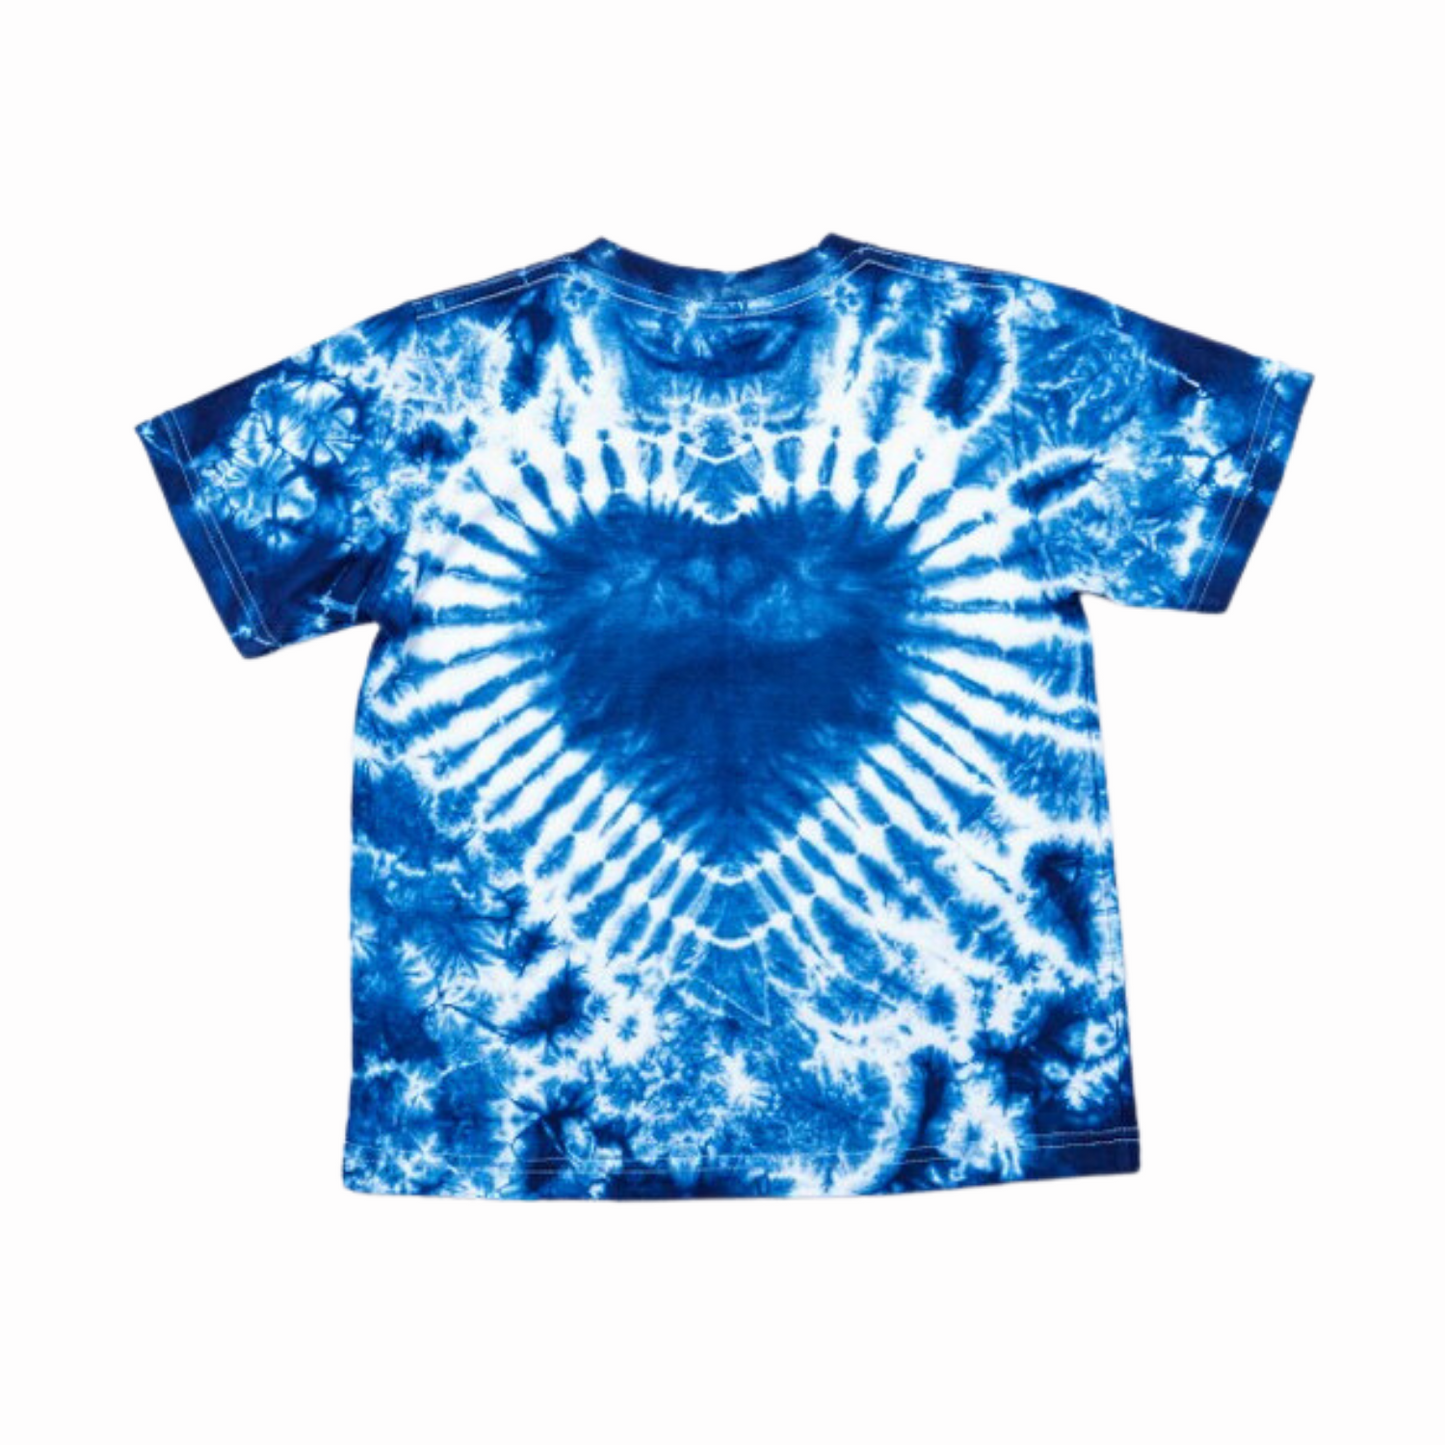 Tie Dye T Shirts for Kids Boys Girls Short Sleeve Round Neck 100% Cotton Colorful Shirt Casual Summer Tee Tops 2XL